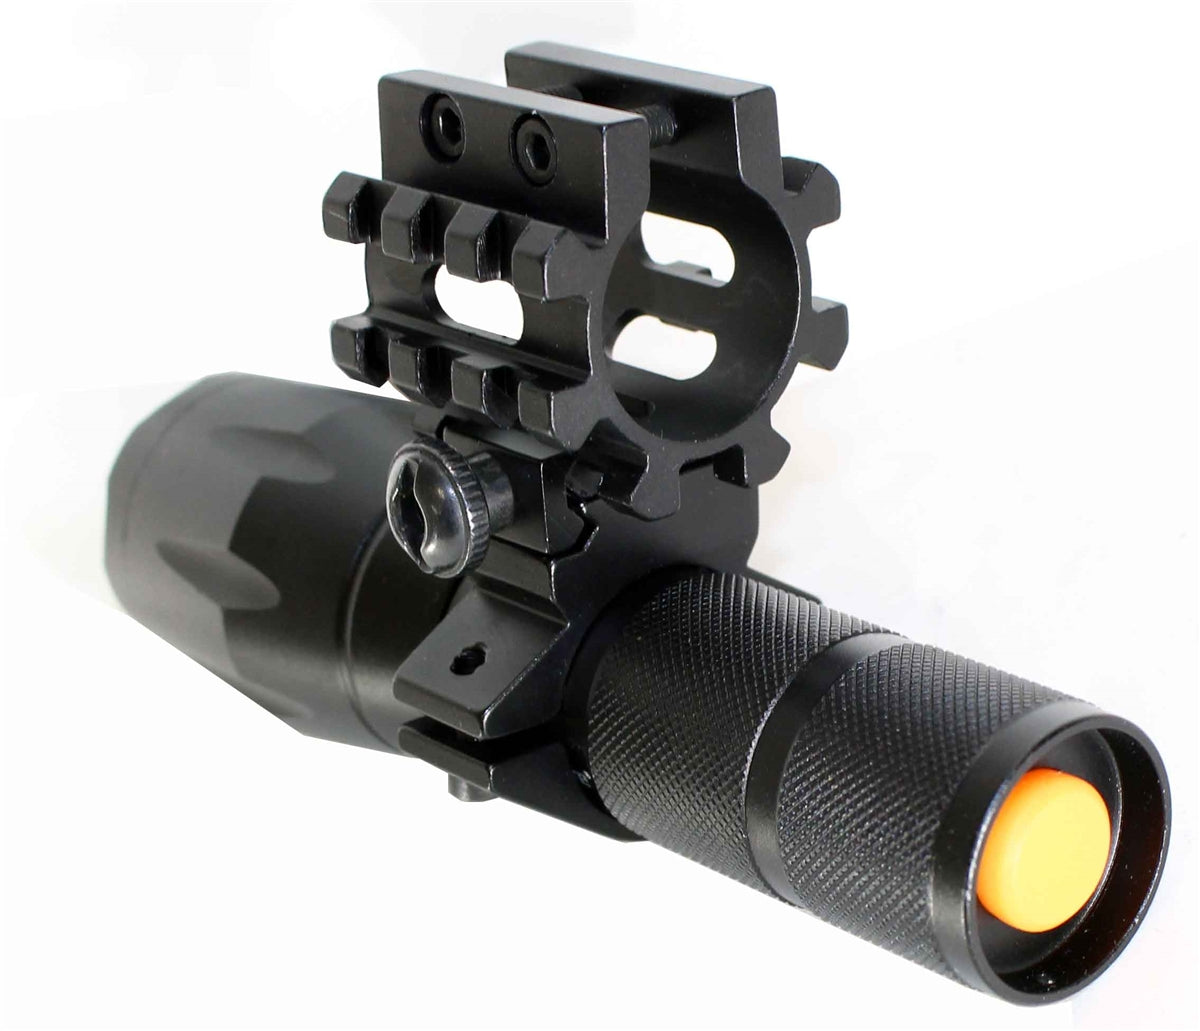 Tactical 1000 Lumen Flashlight With Mount Compatible with Stoeger Freedom series 12 Gauge Pumps.